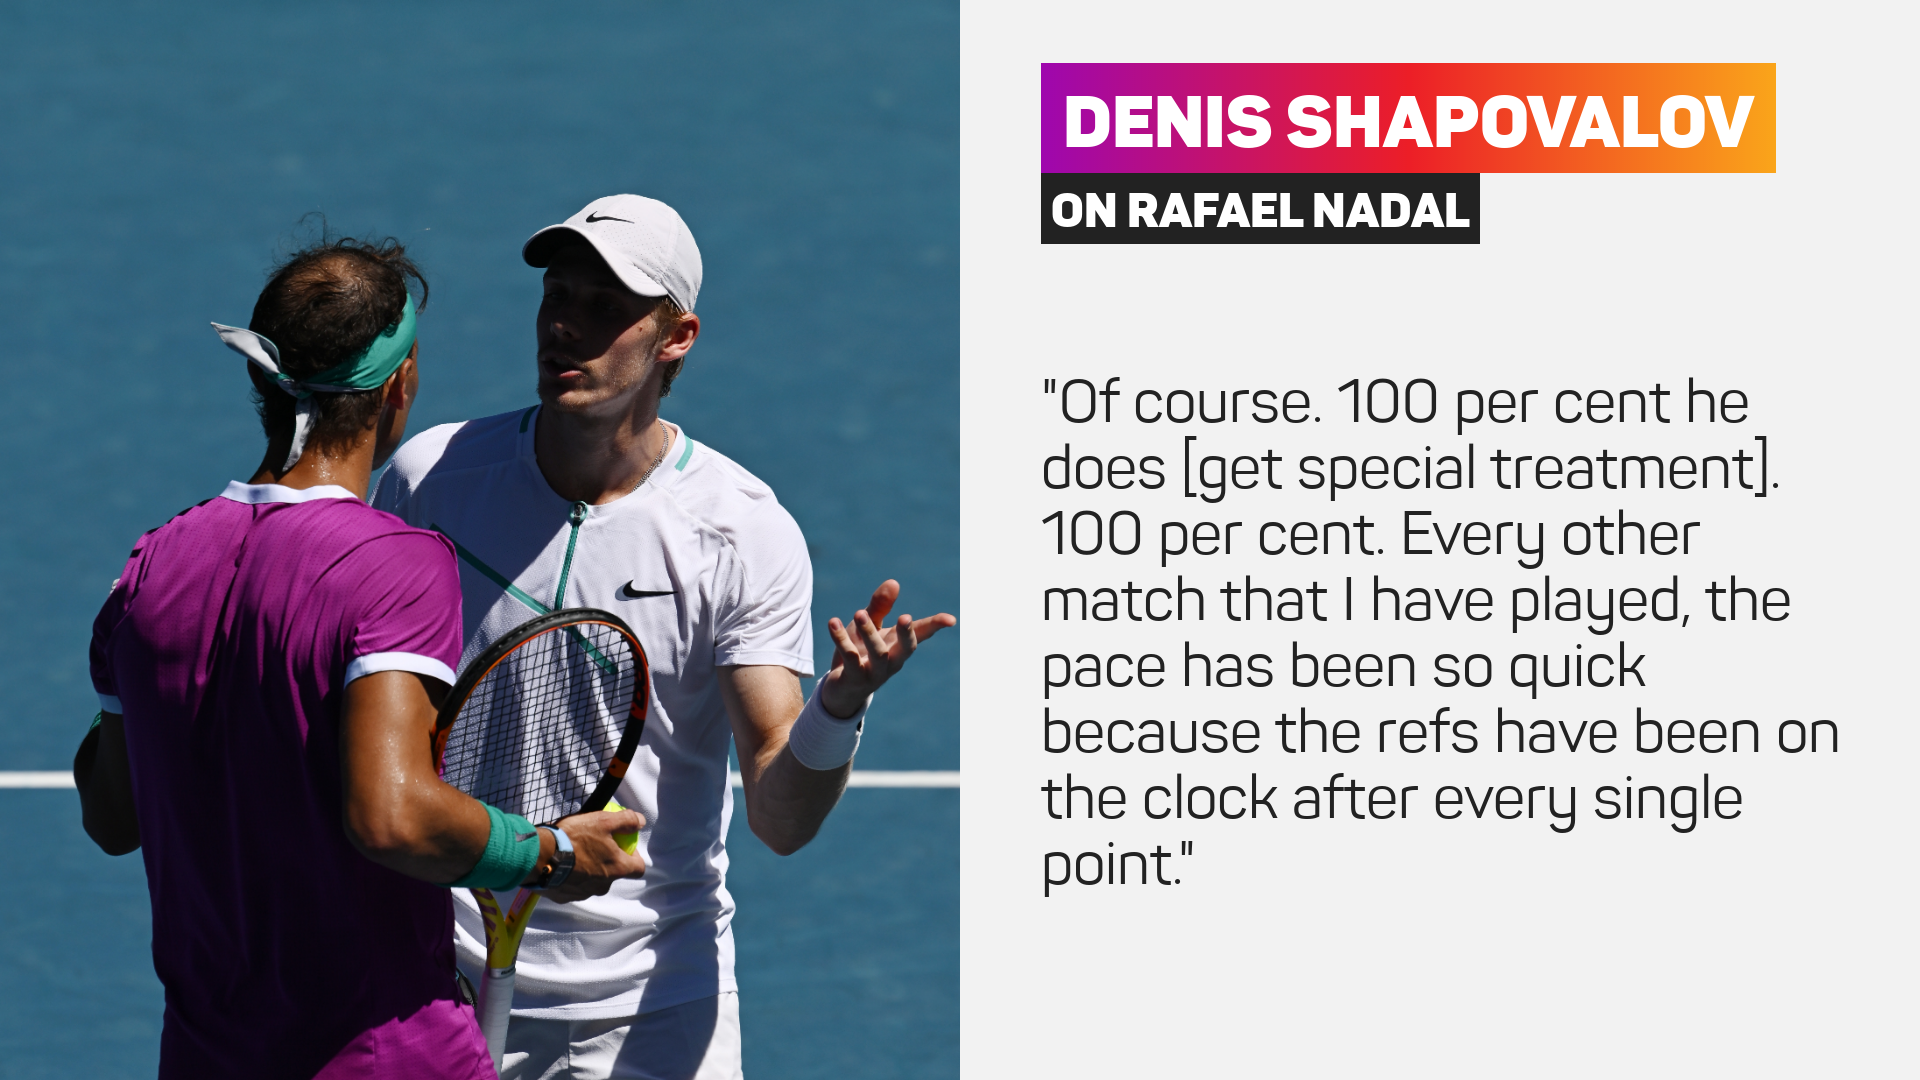 Denis Shapovalov did not hold back after his loss to Rafael Nadal